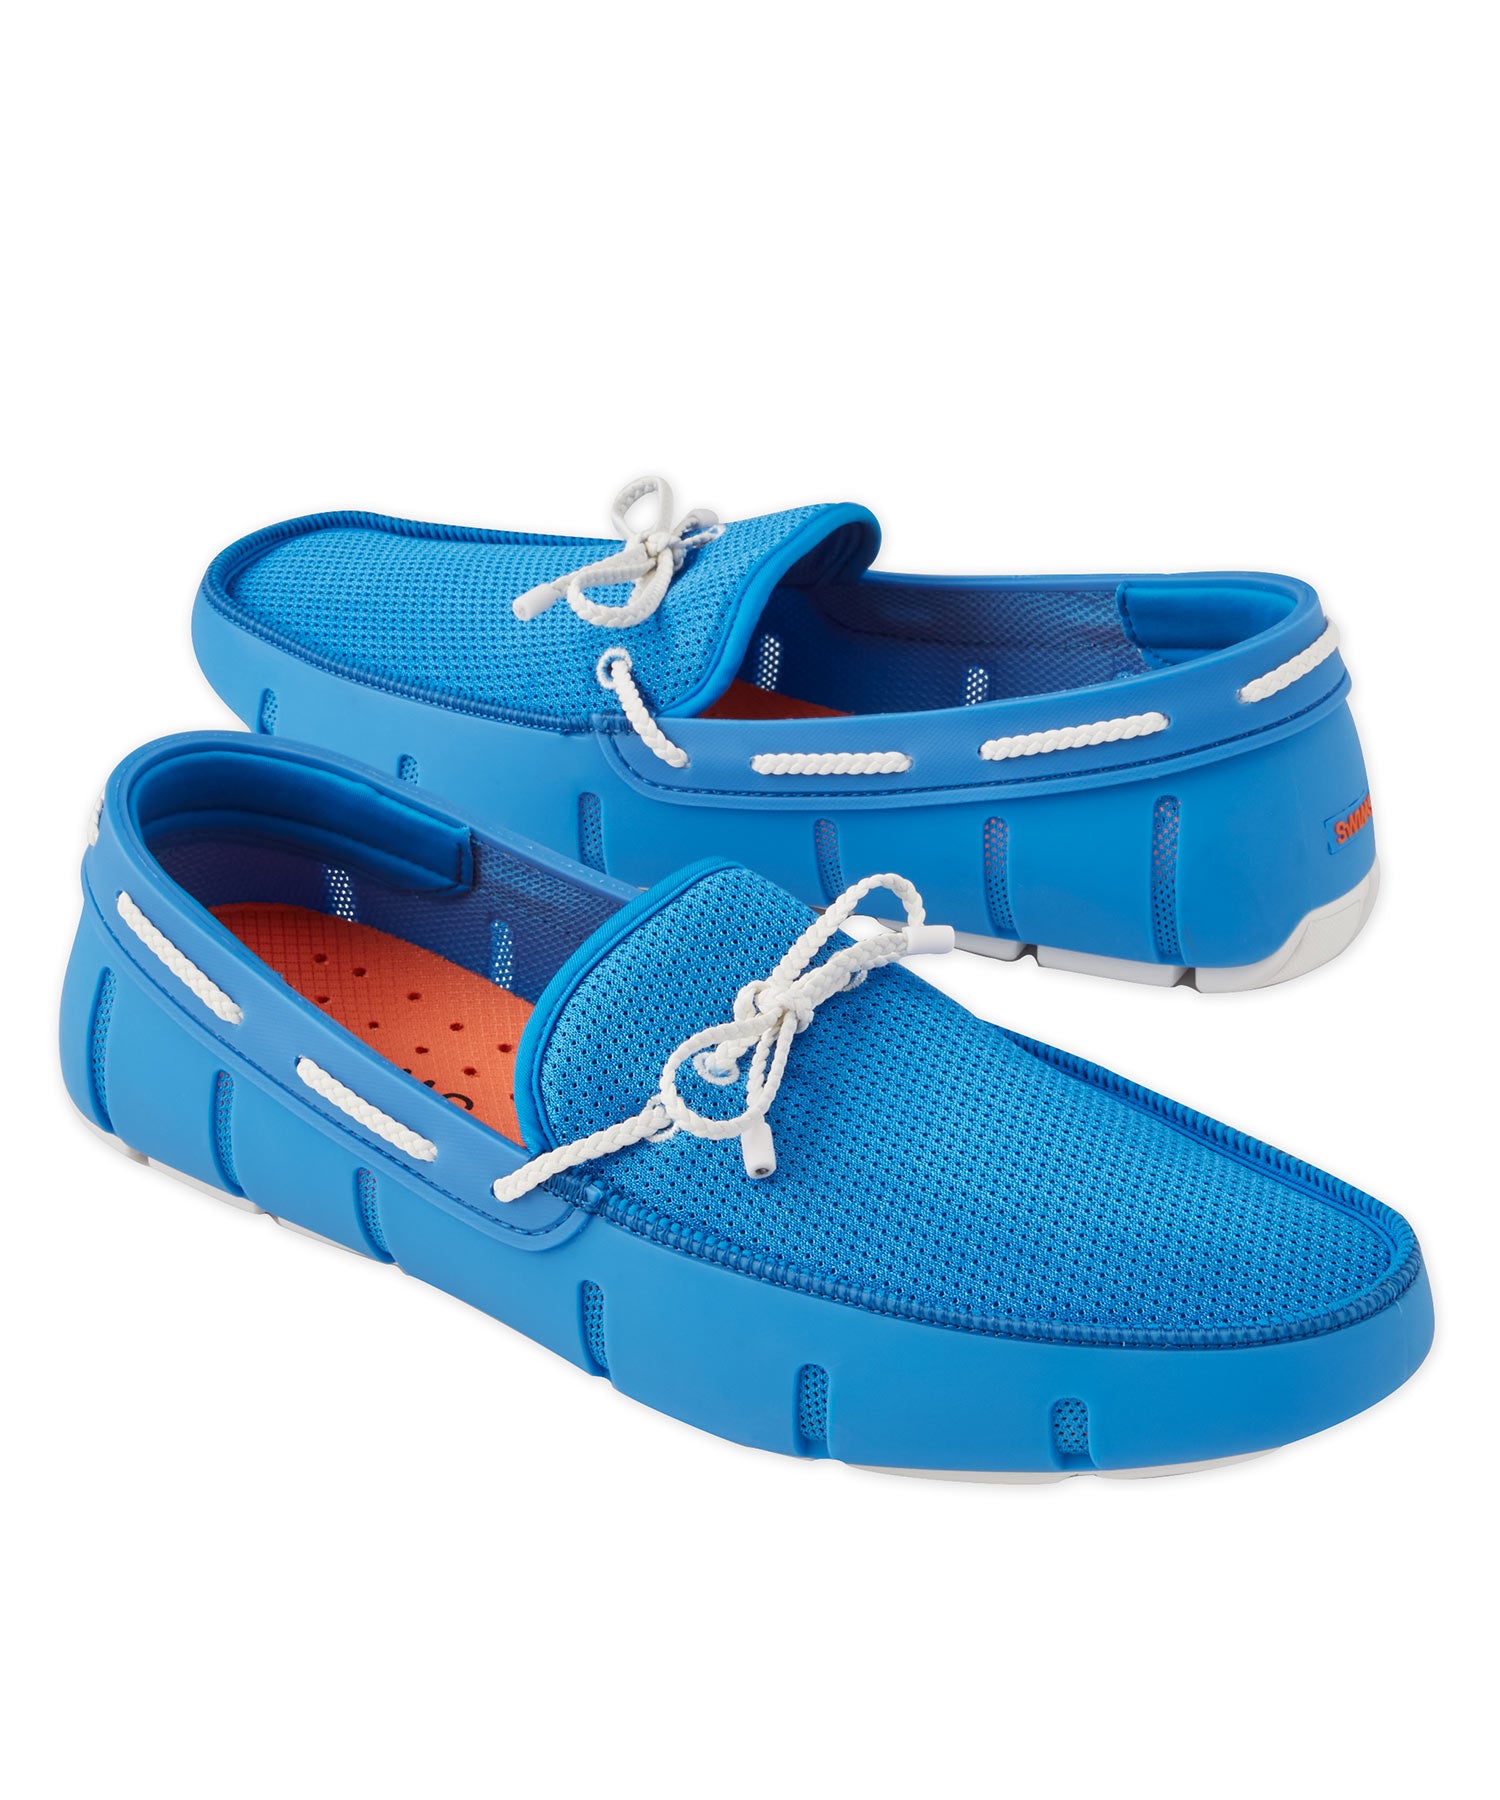 Swims Braided Lace Loafer, Men's Big & Tall